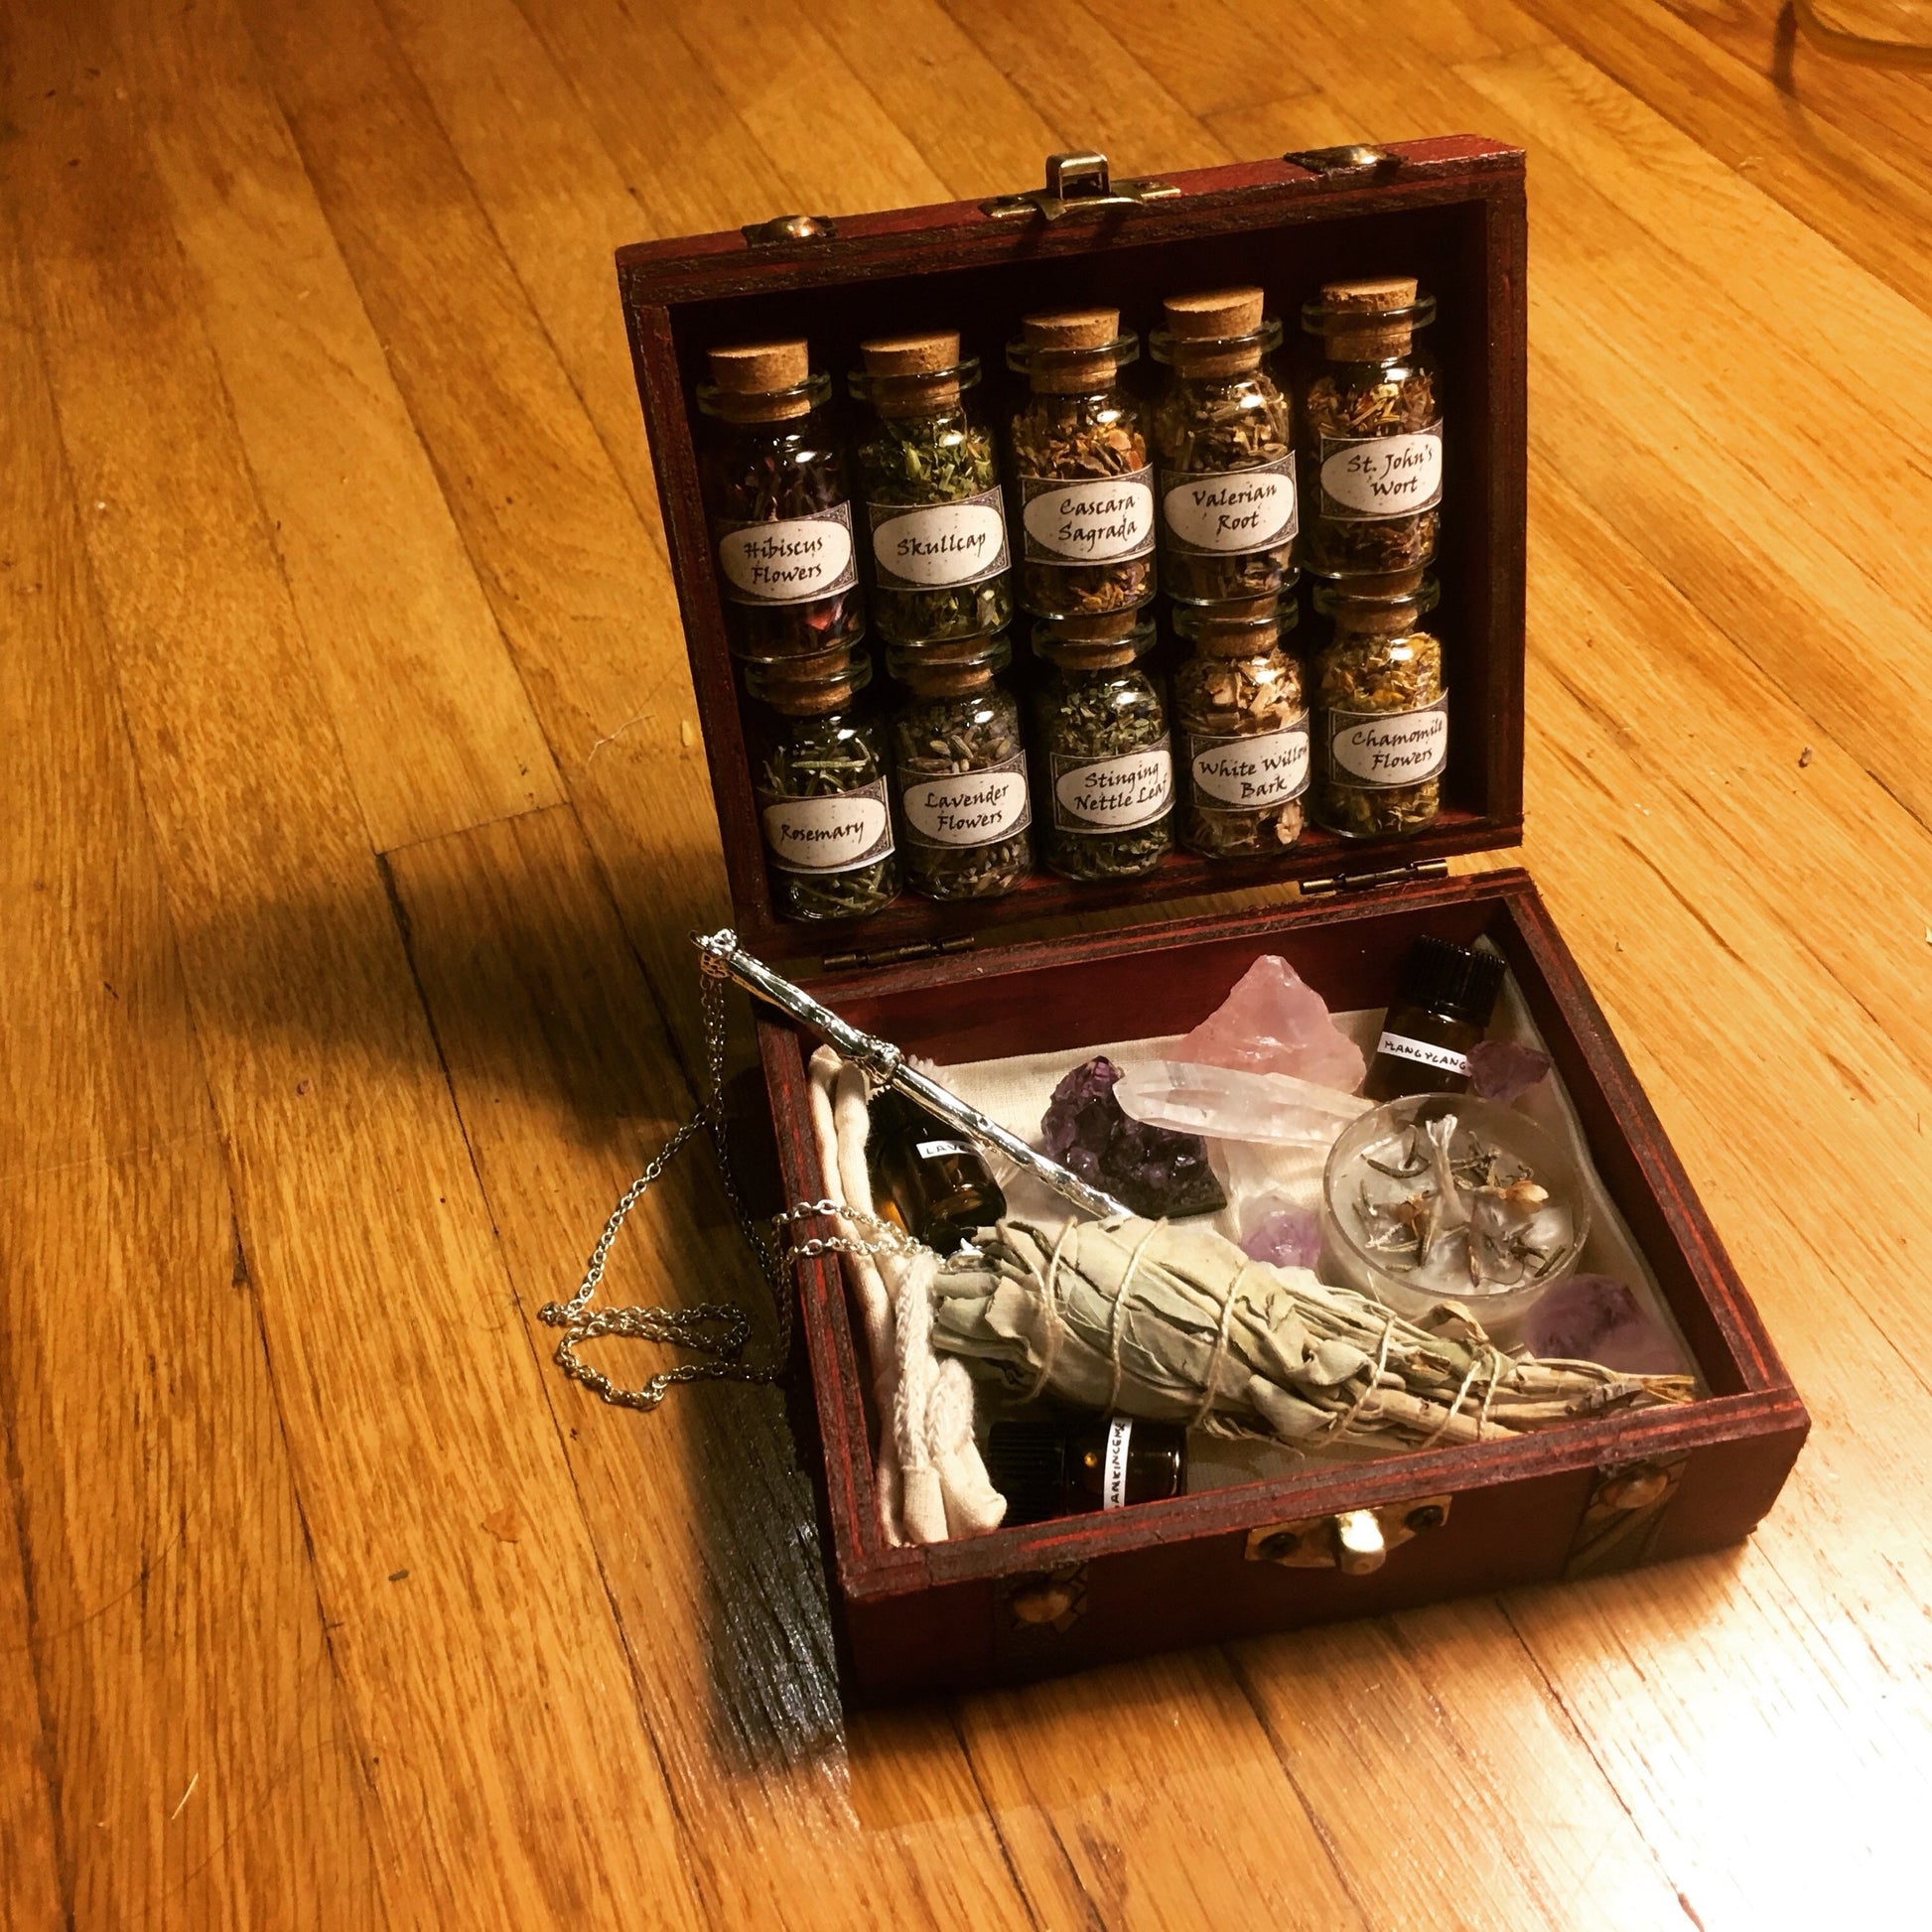 travel witchcraft kit – Secretly A Witch